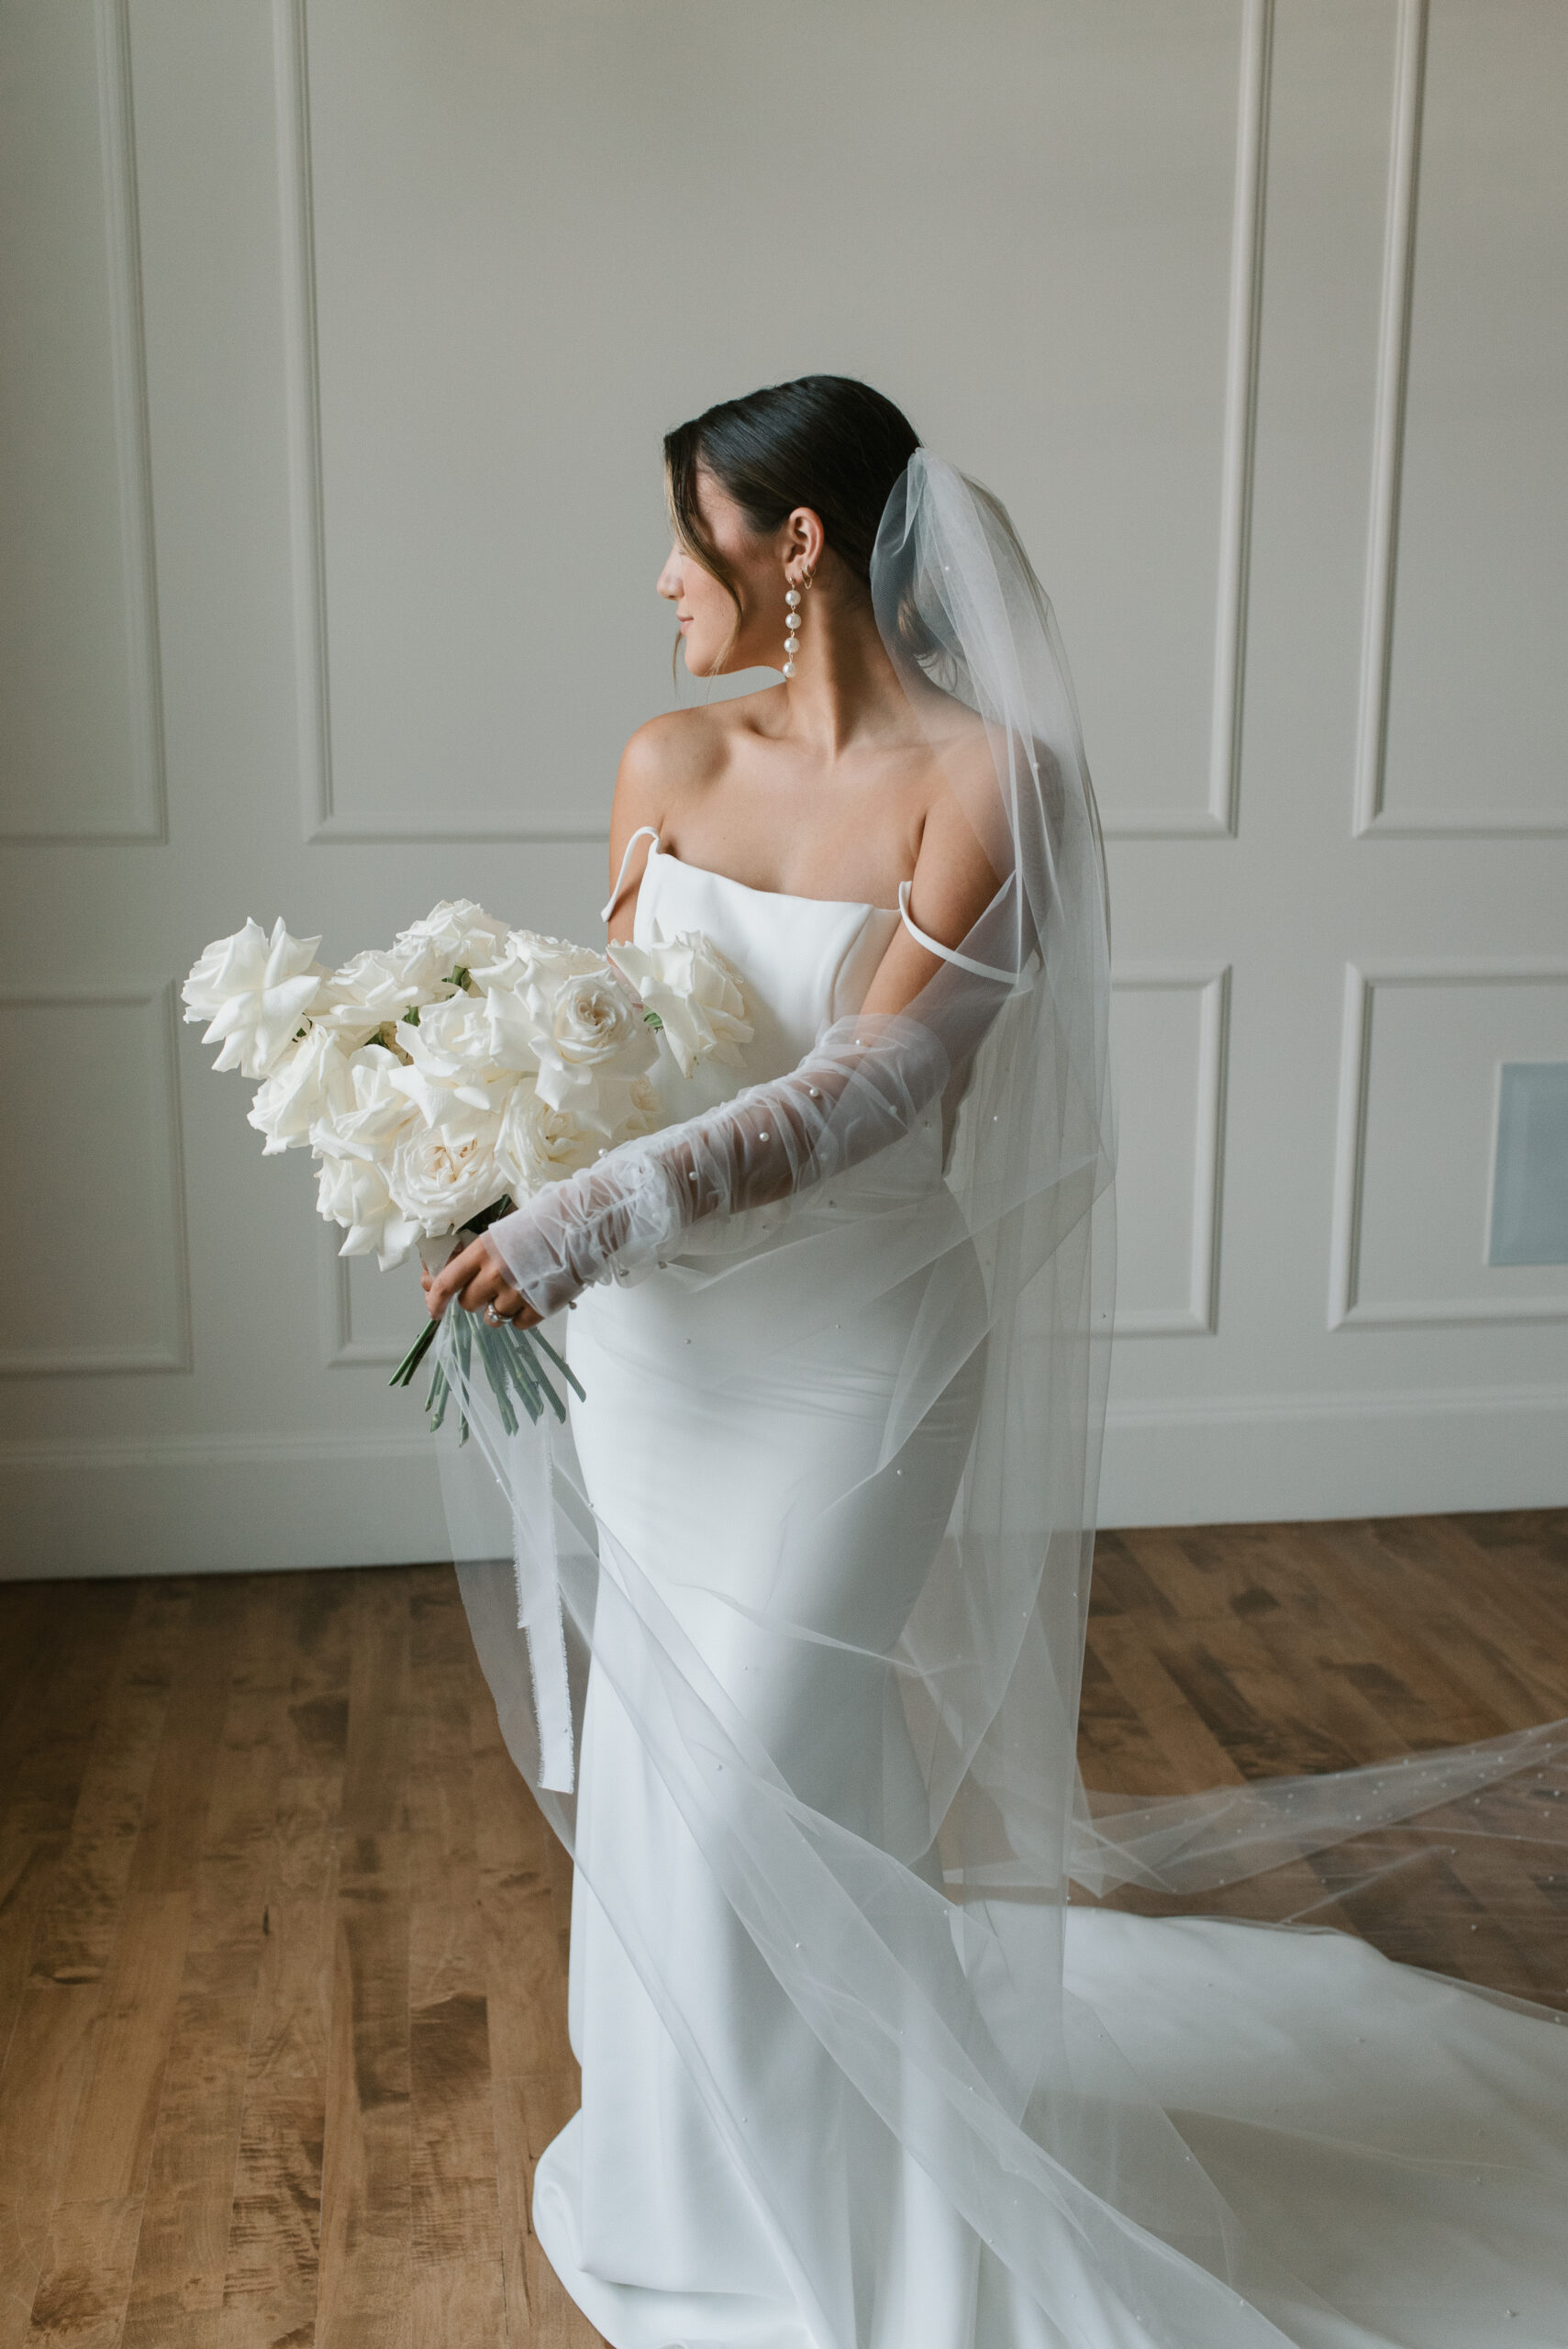 editorial bridal portrait with sheer wedding gloves and all white bouquet